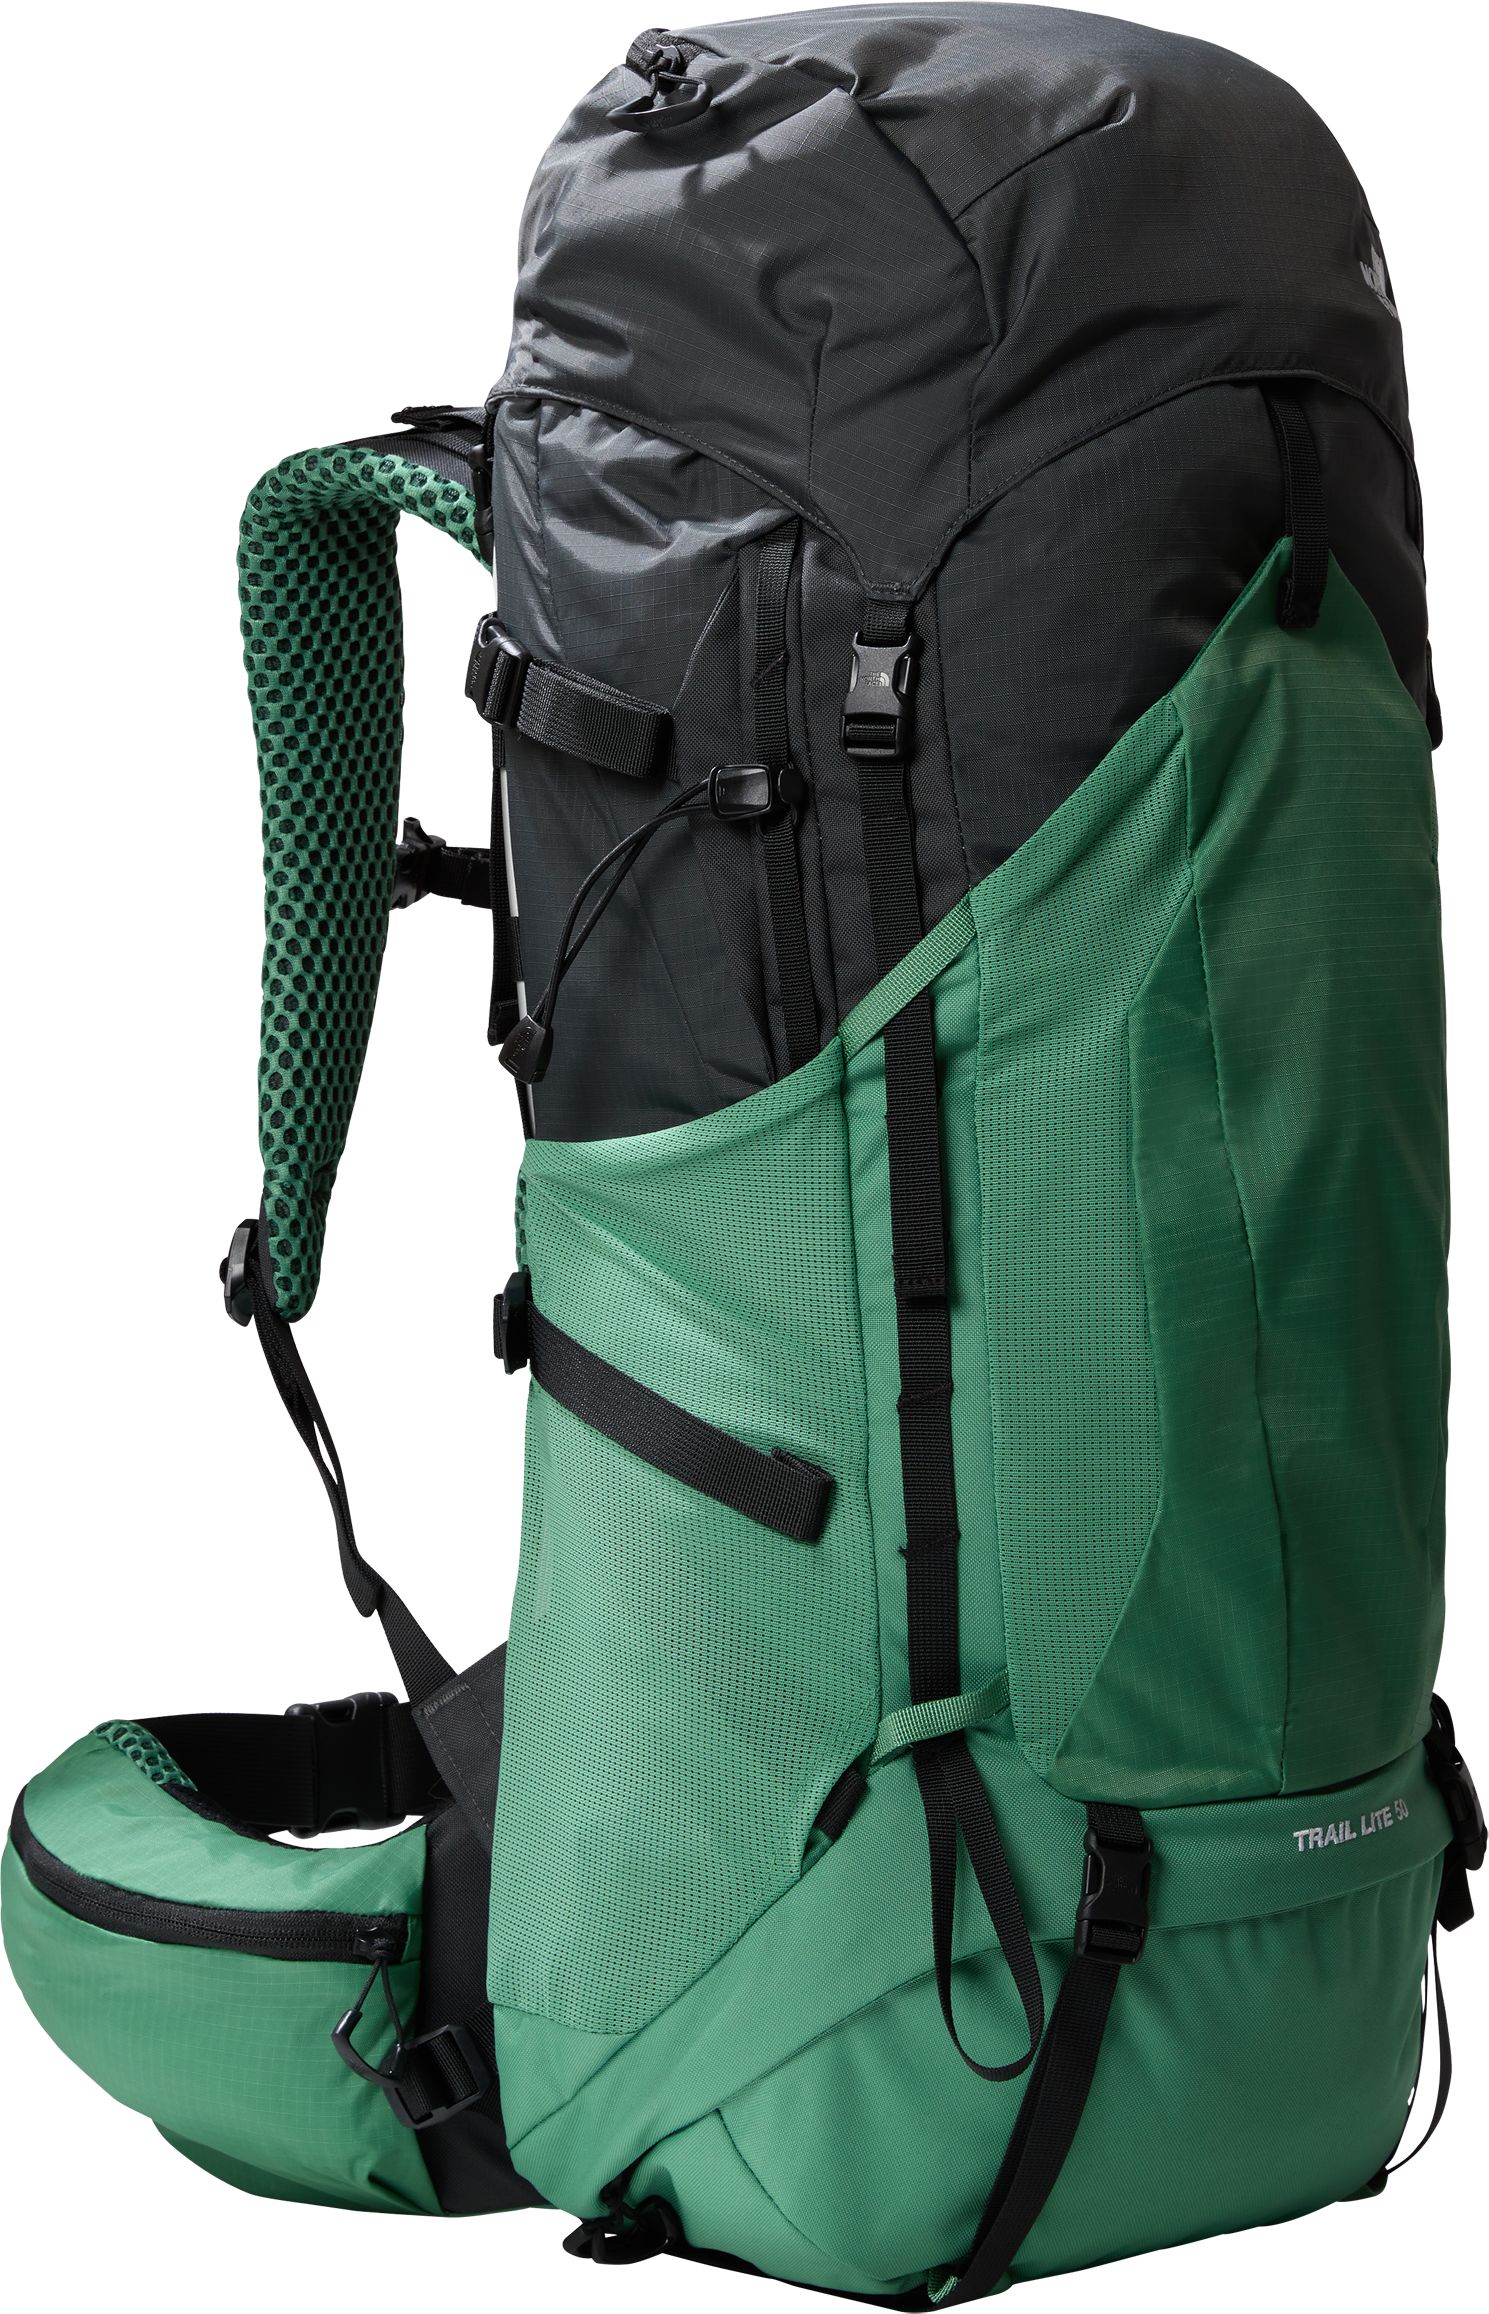 THE NORTH FACE, TRAIL LITE 50